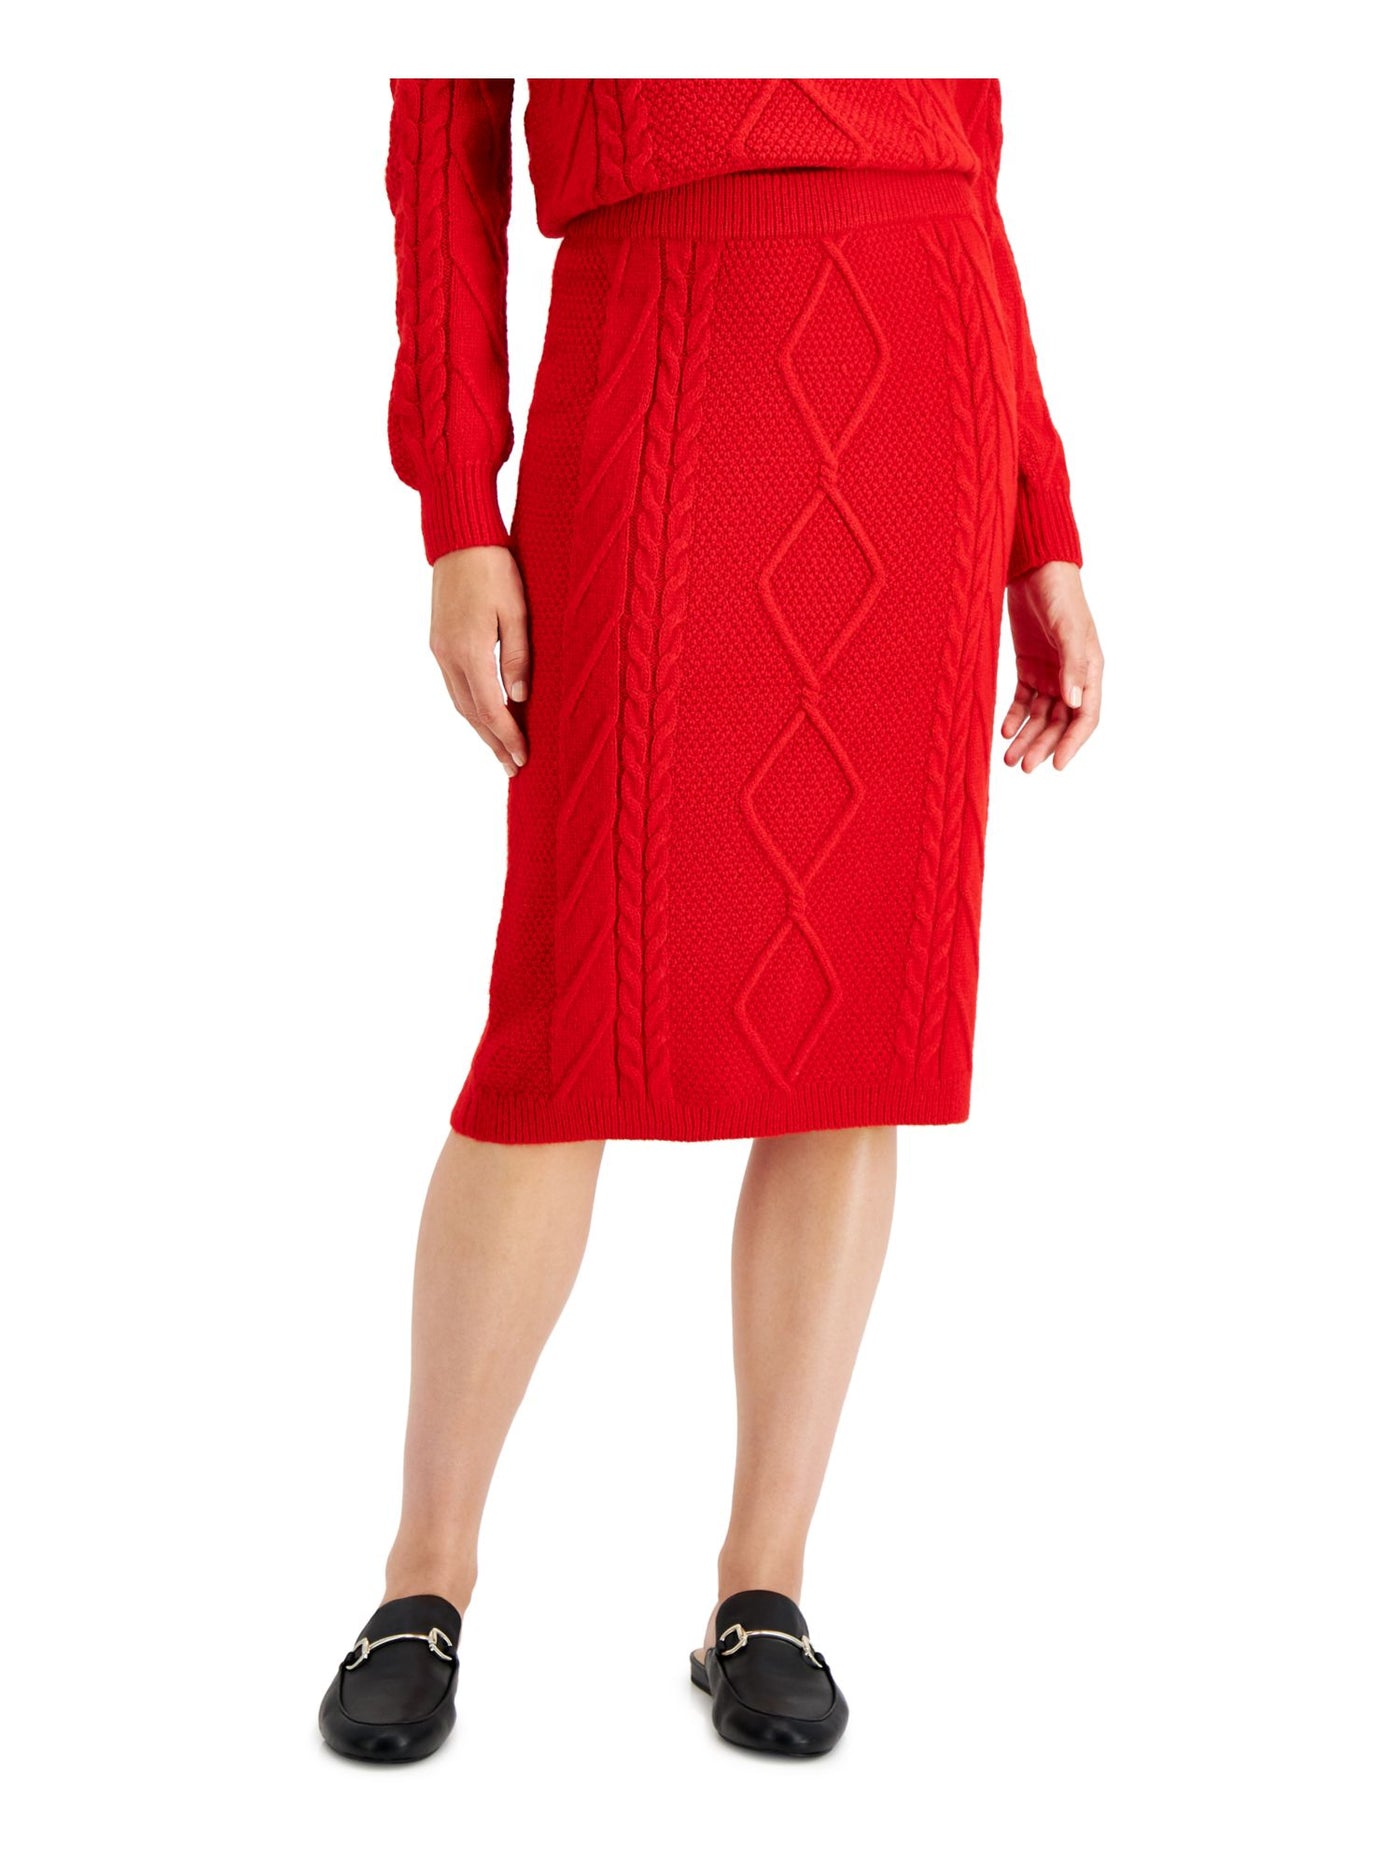 CHARTER CLUB Womens Red Knit Textured Ribbed Sweater Knee Length Pencil Skirt XL